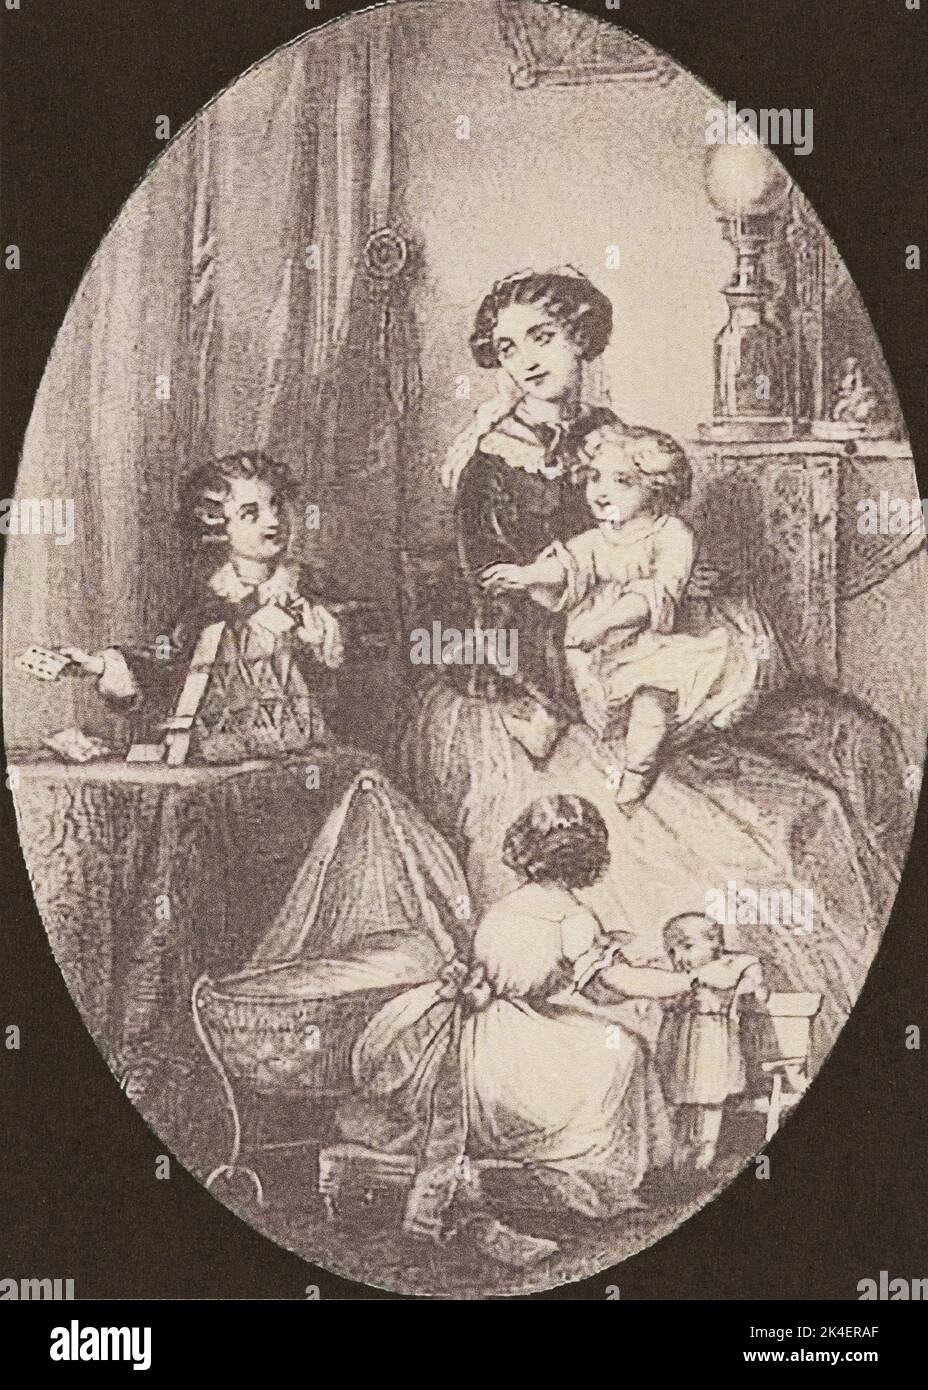 The light of the home, illustraion from  American lady's book in 19th century. Stock Photo